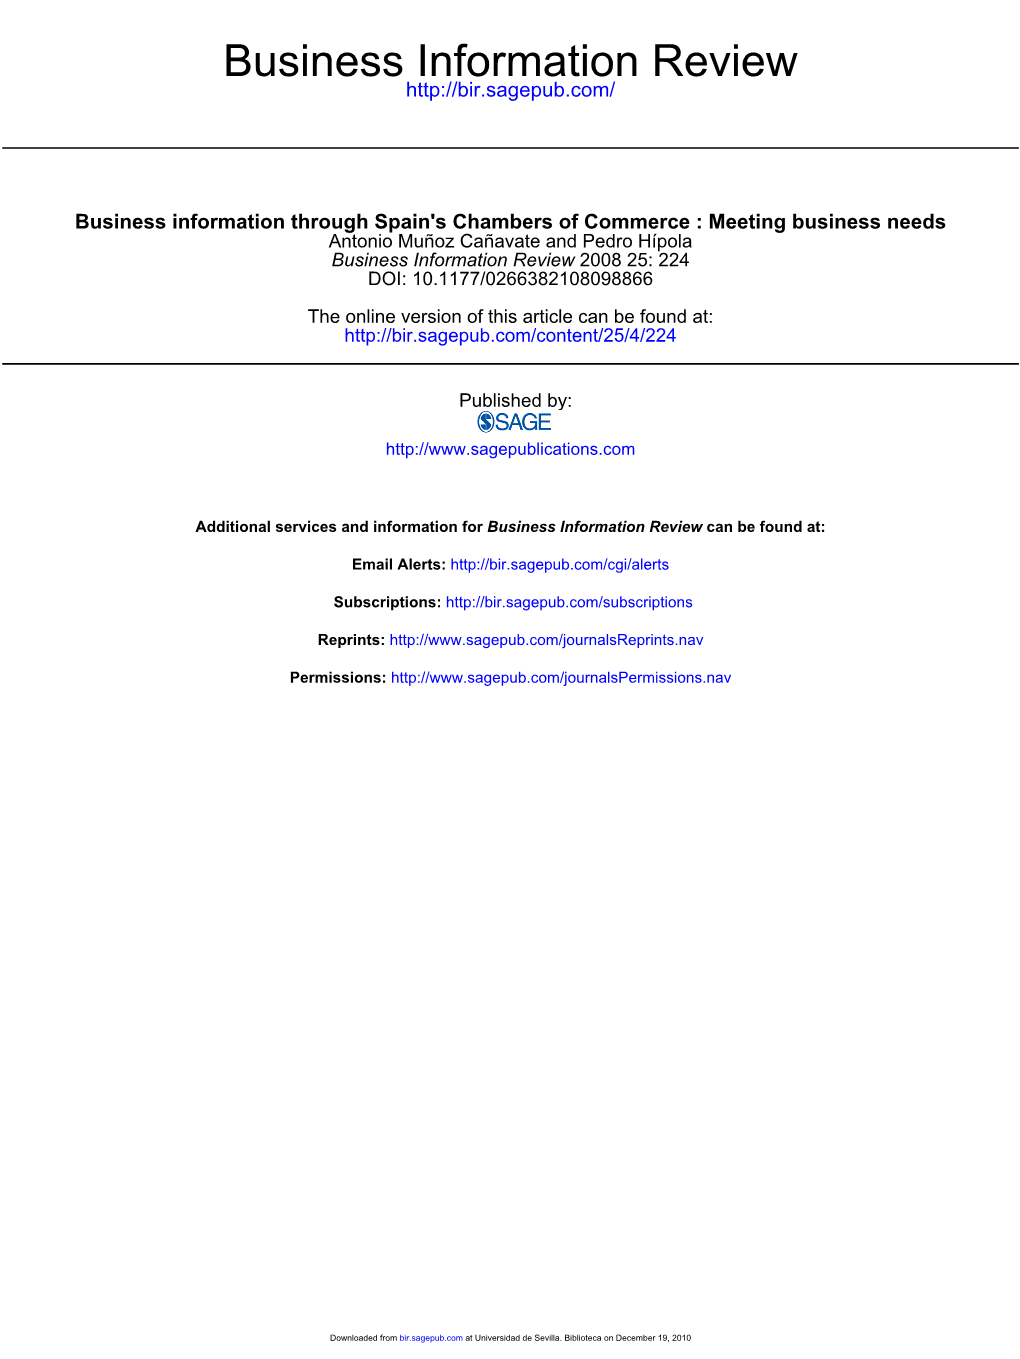 Business Information Through Spain's Chambers Of